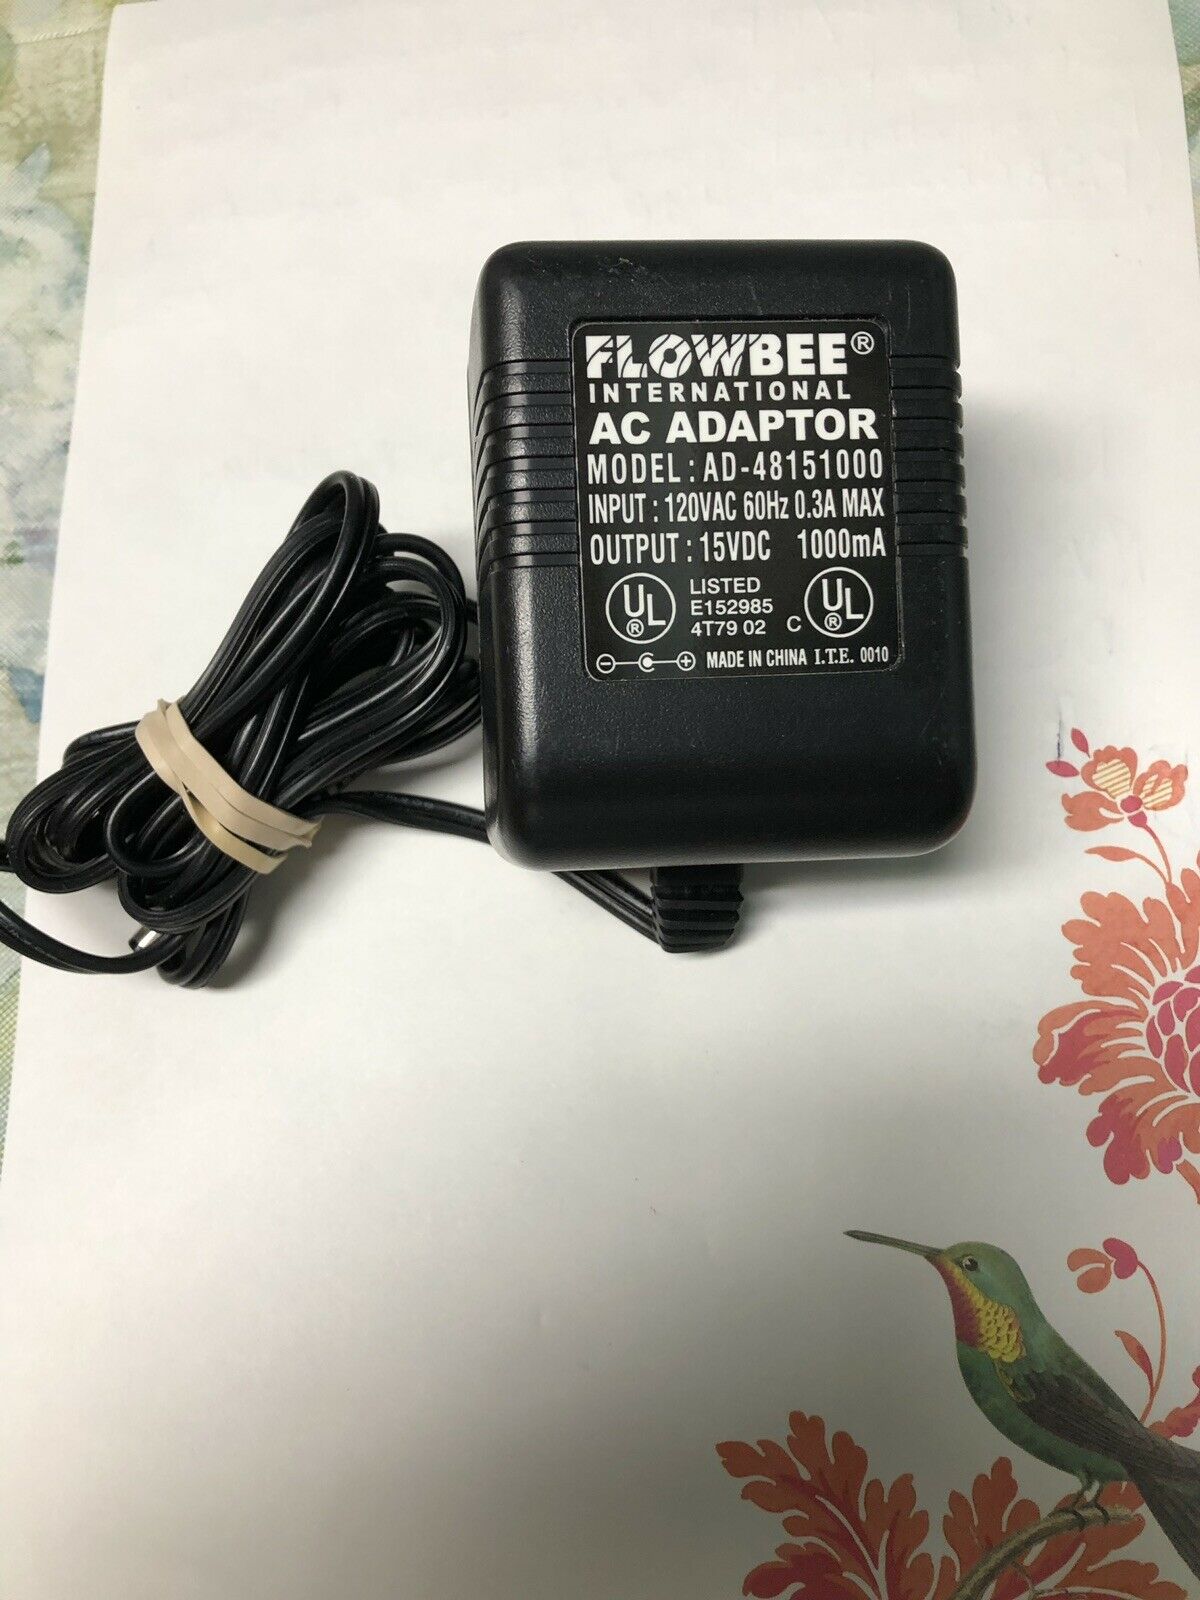 *Brand NEW*Flowbee AD-48151000 15VDC 1000mA AC DC Adapter POWER SUPPLY